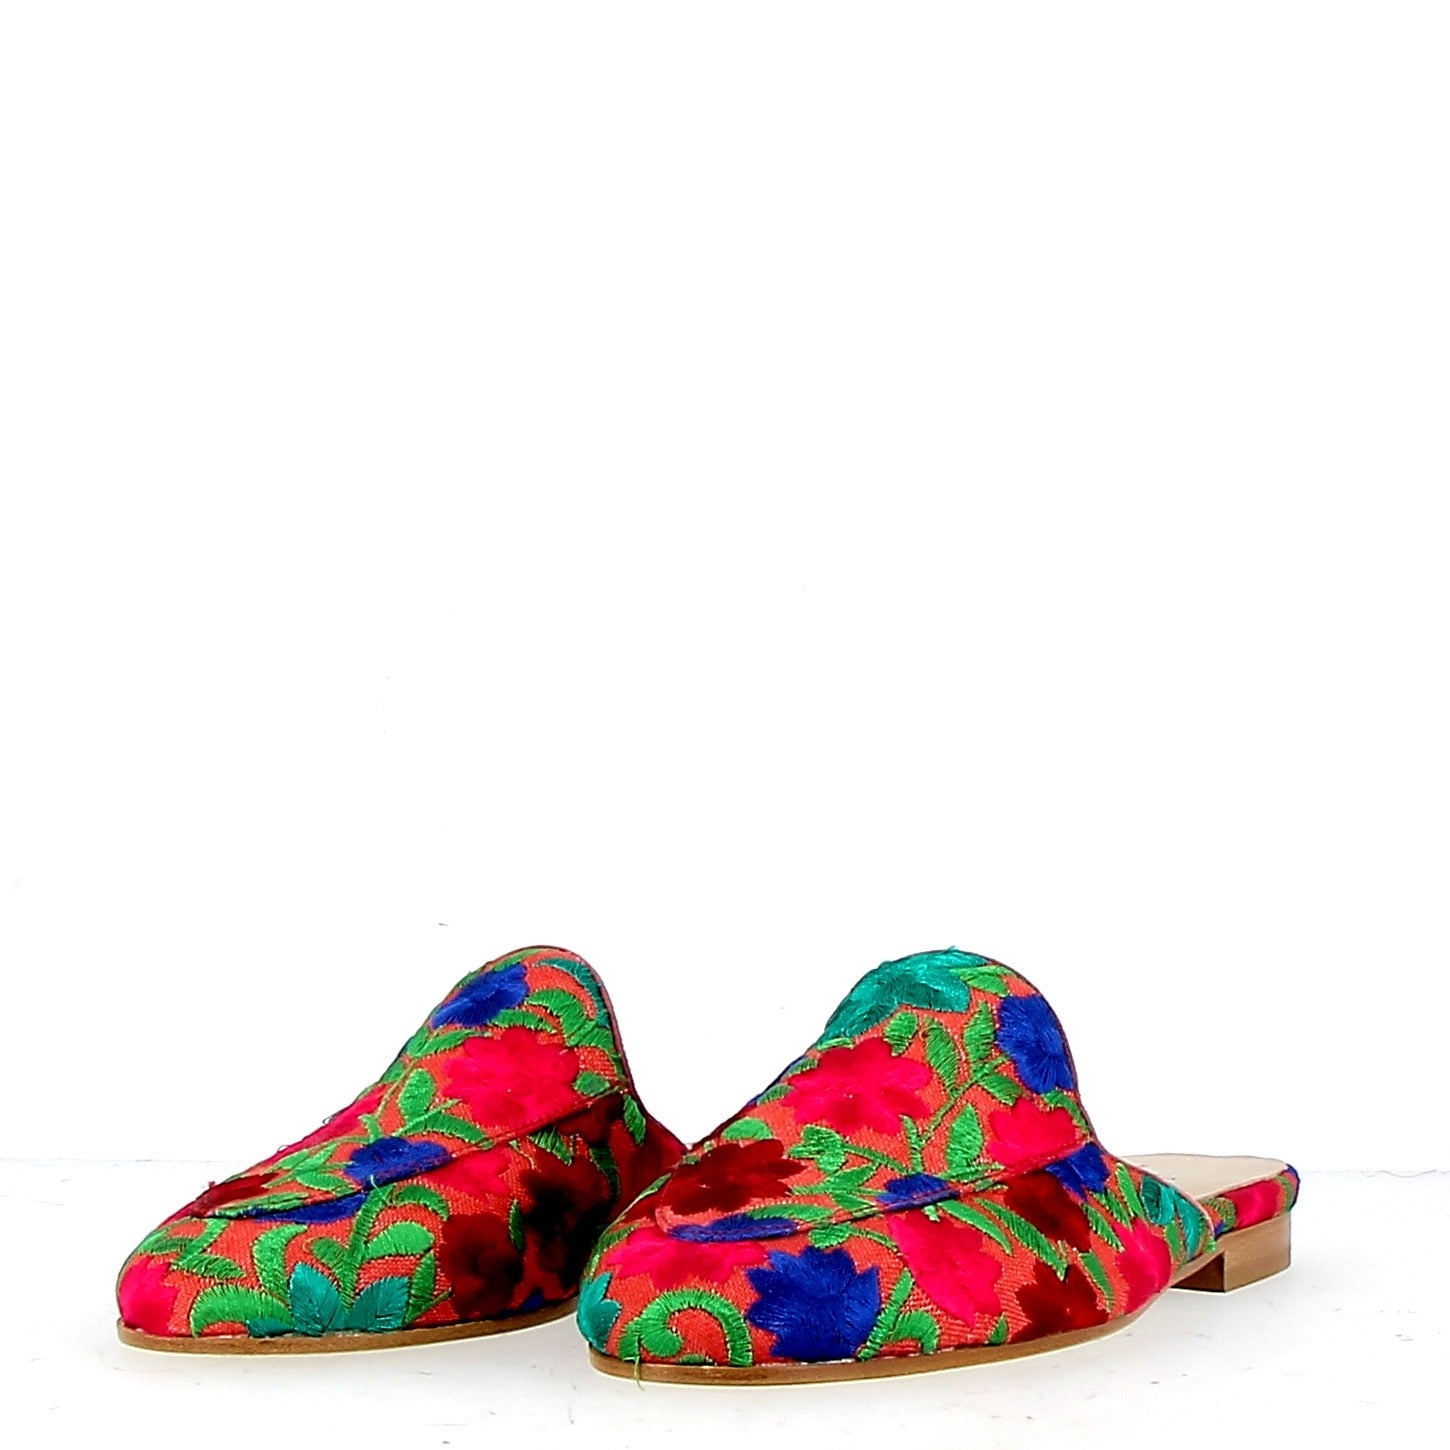 Low mules in floral fabric and leather